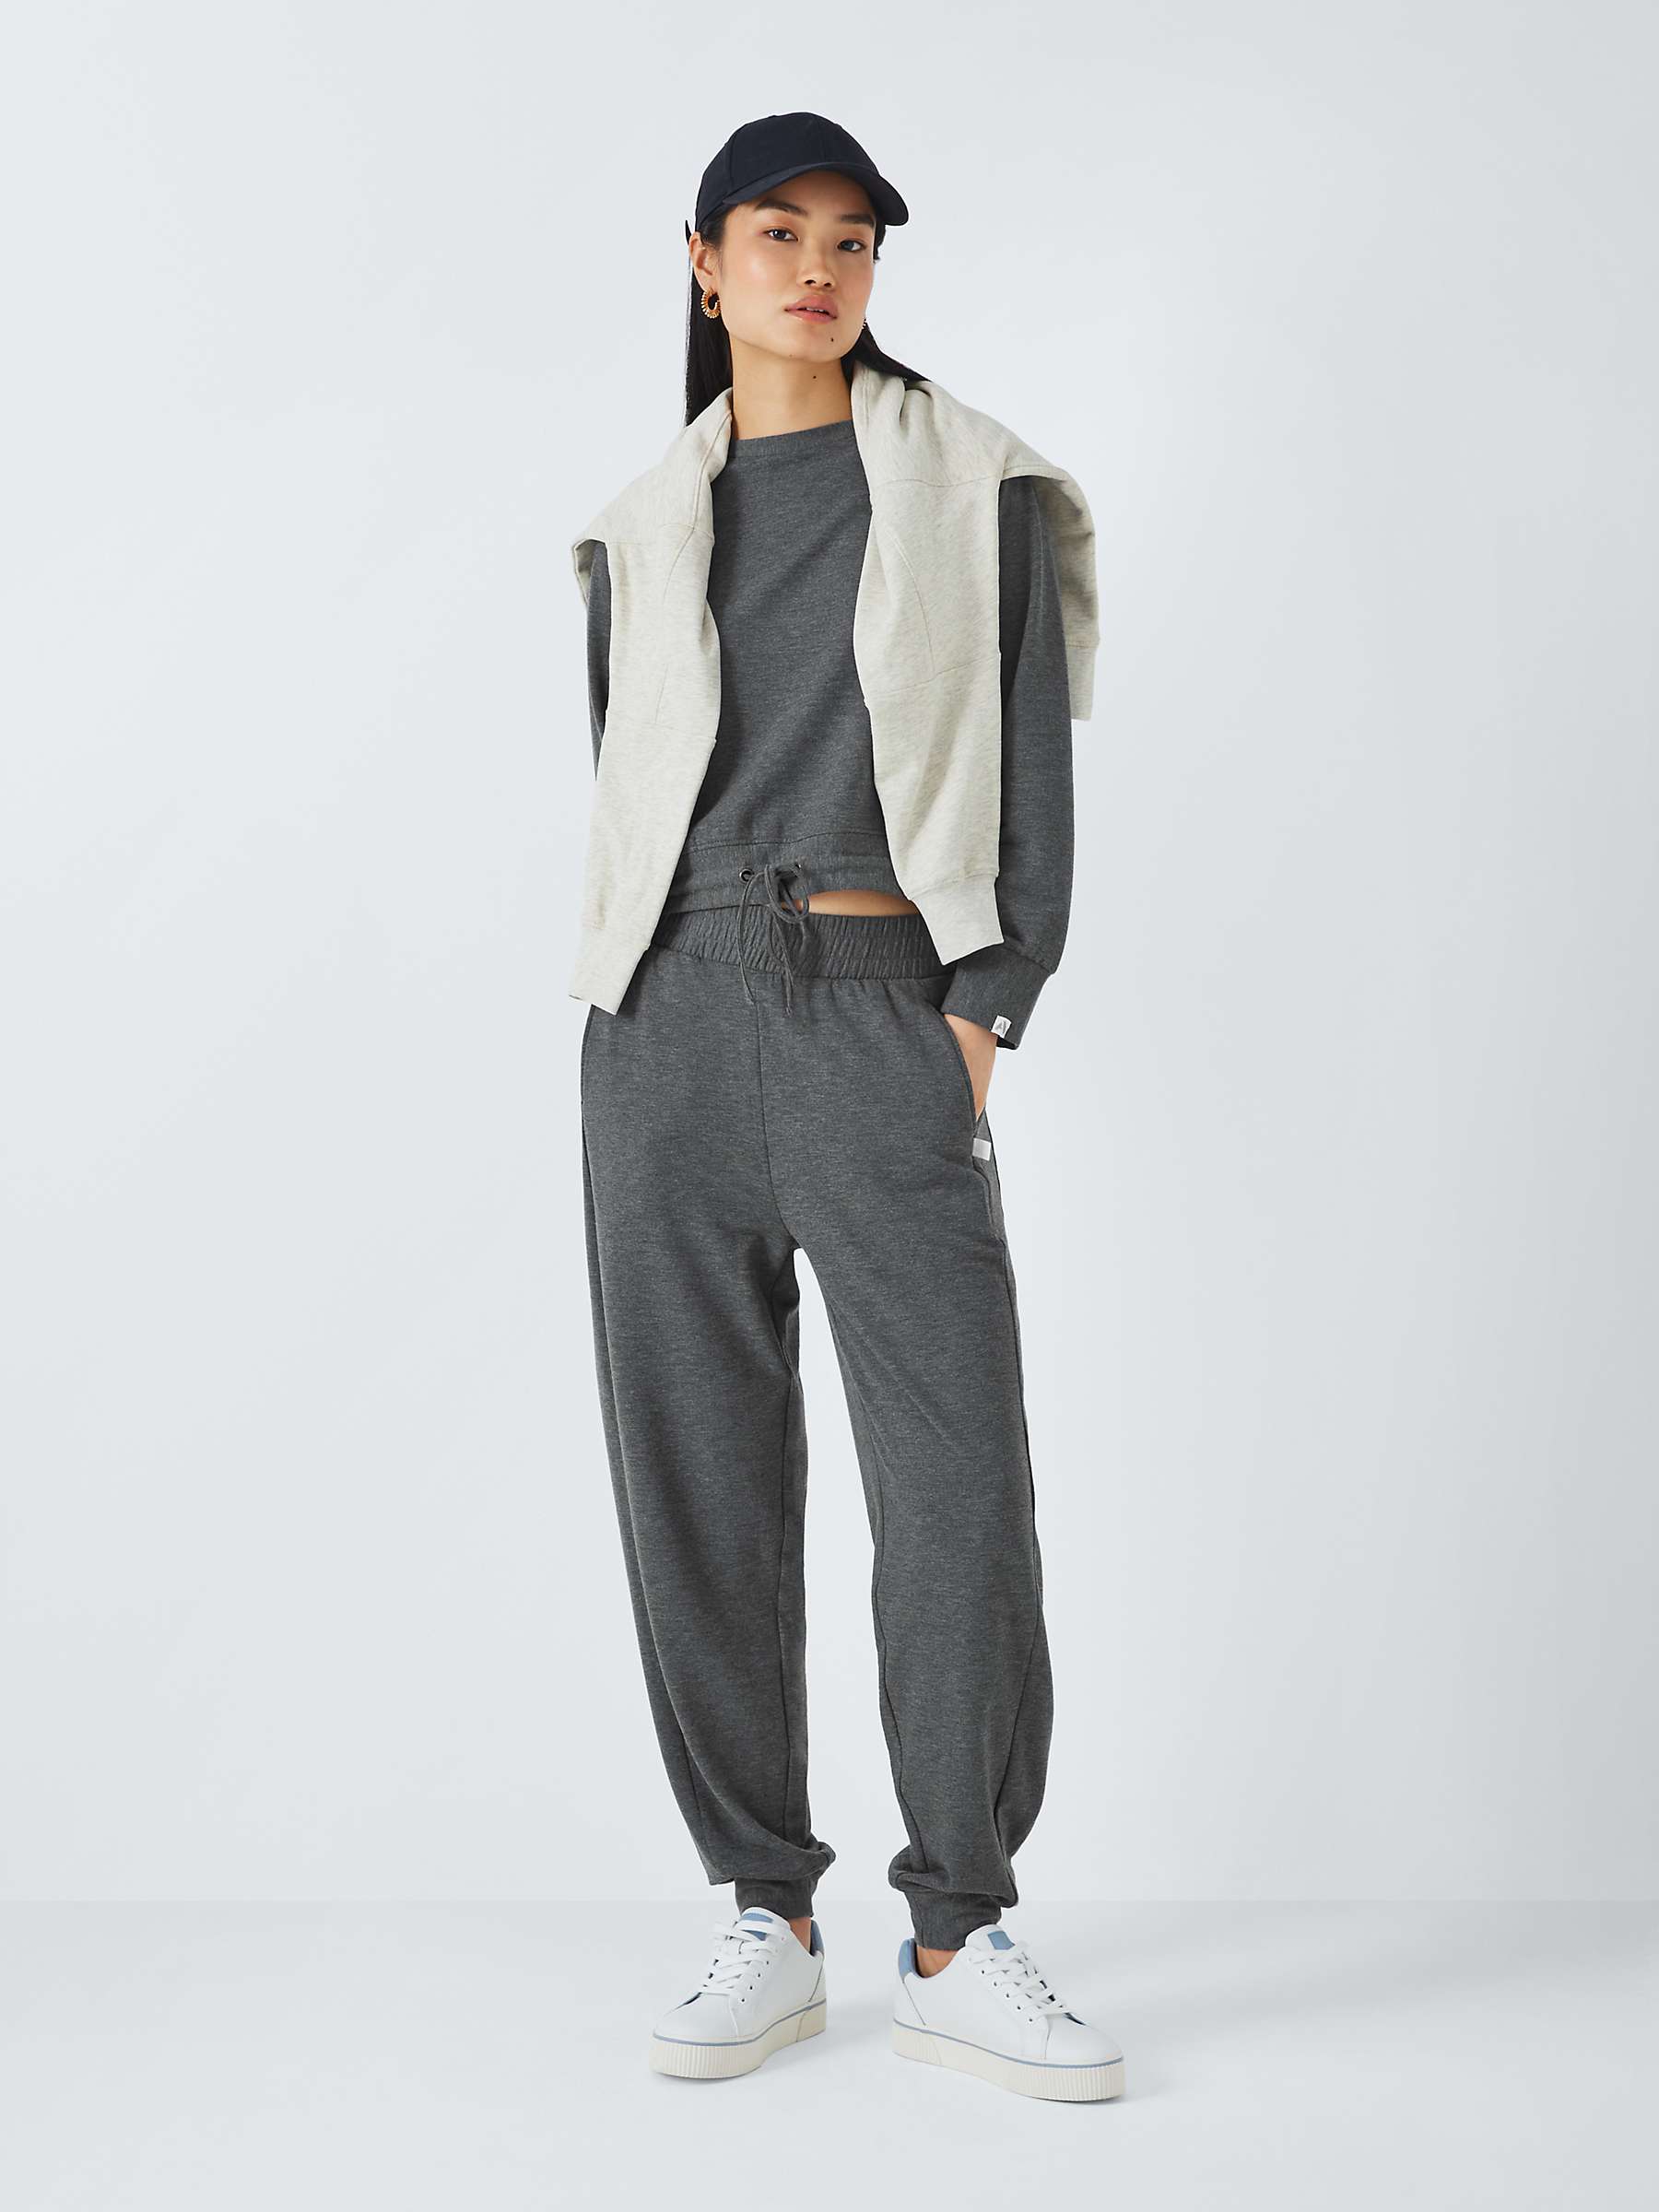 Buy John Lewis ANYDAY Soft Joggers Online at johnlewis.com